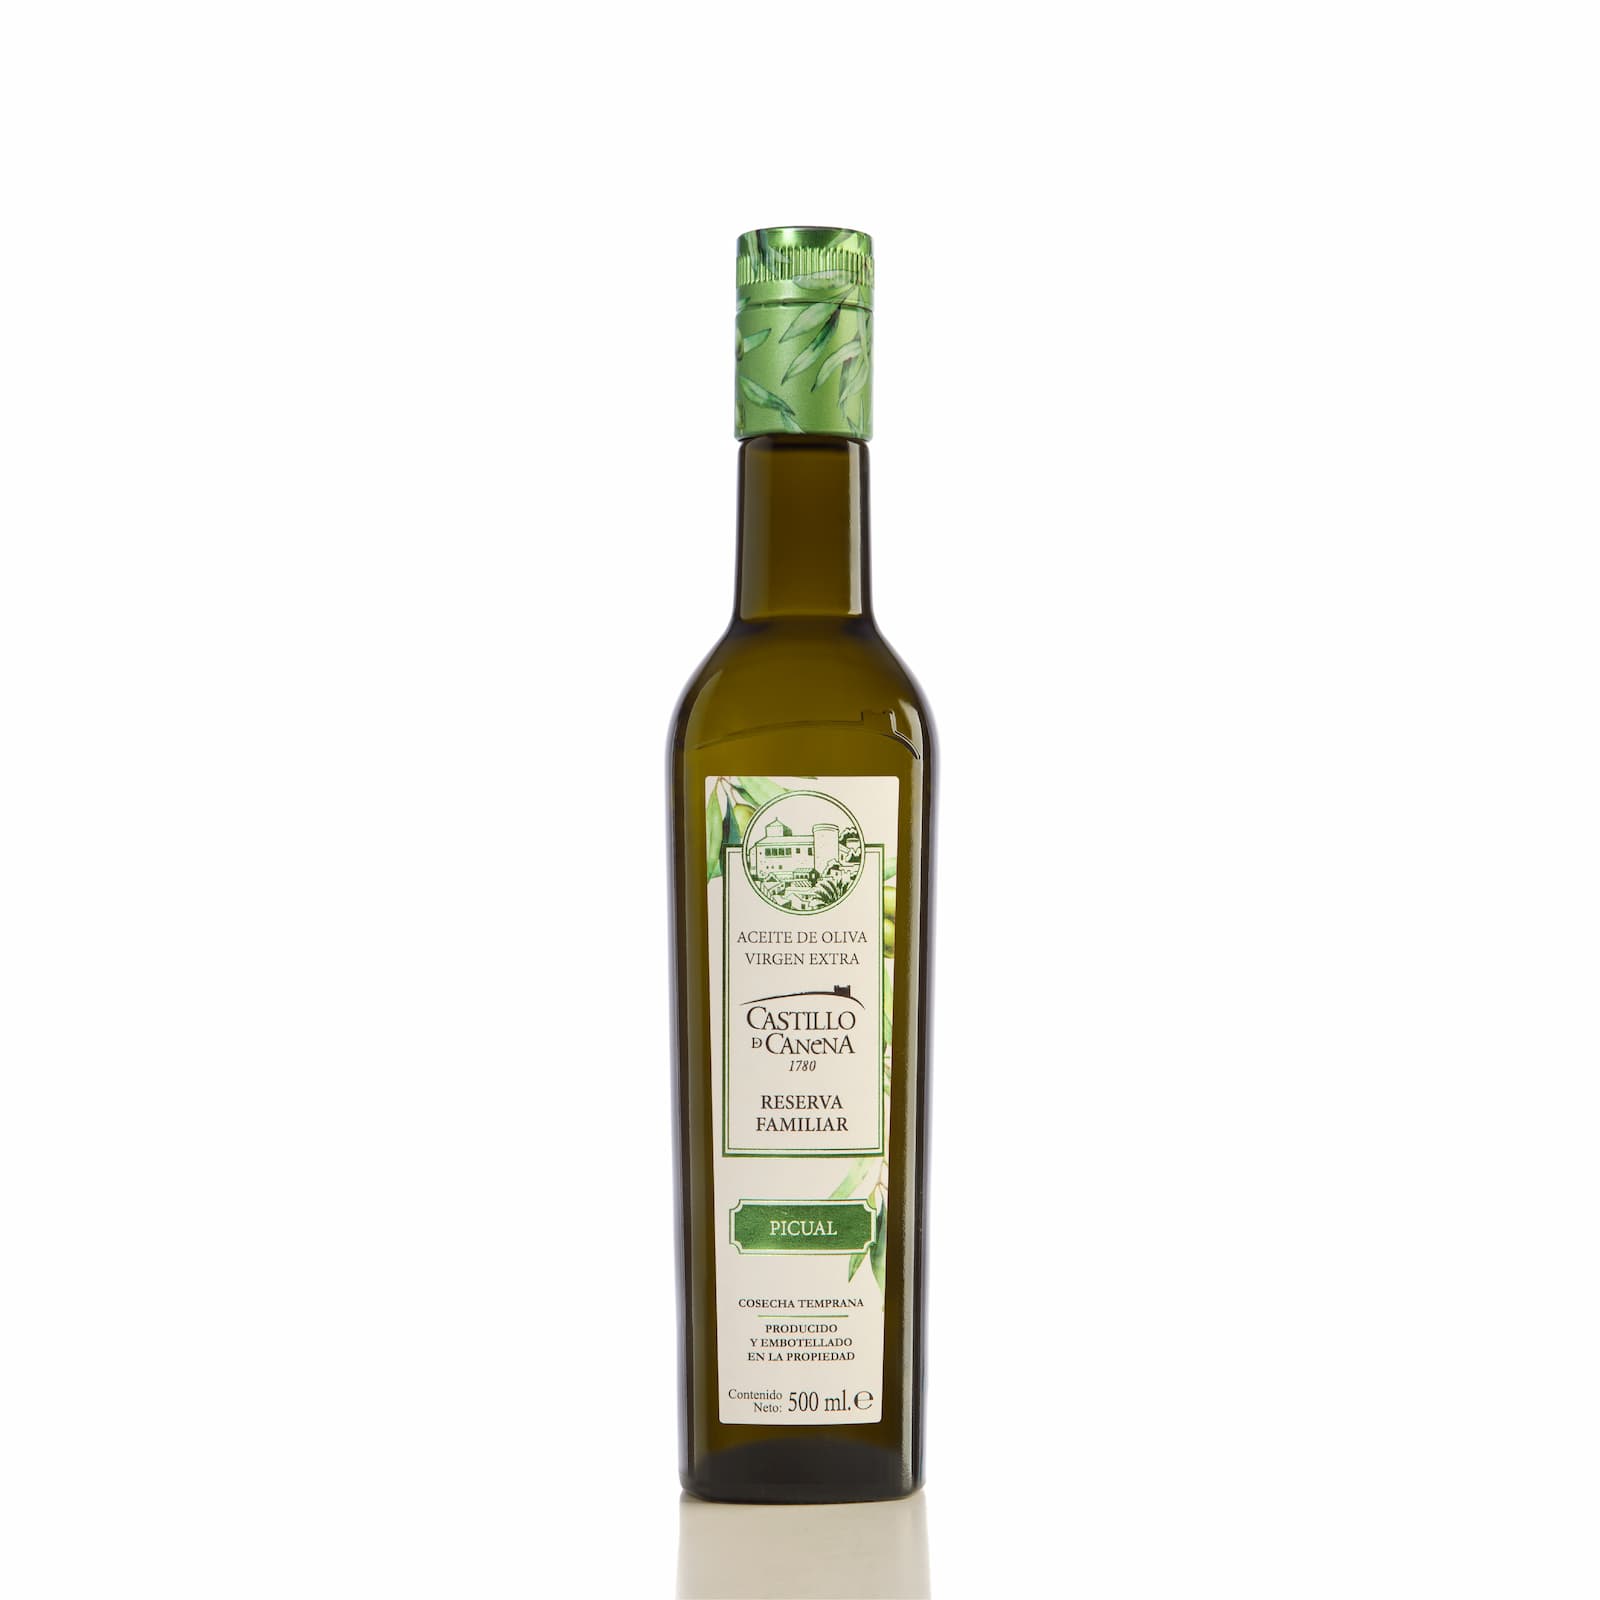 Premium and Gourmet Olive Oil - My CMS